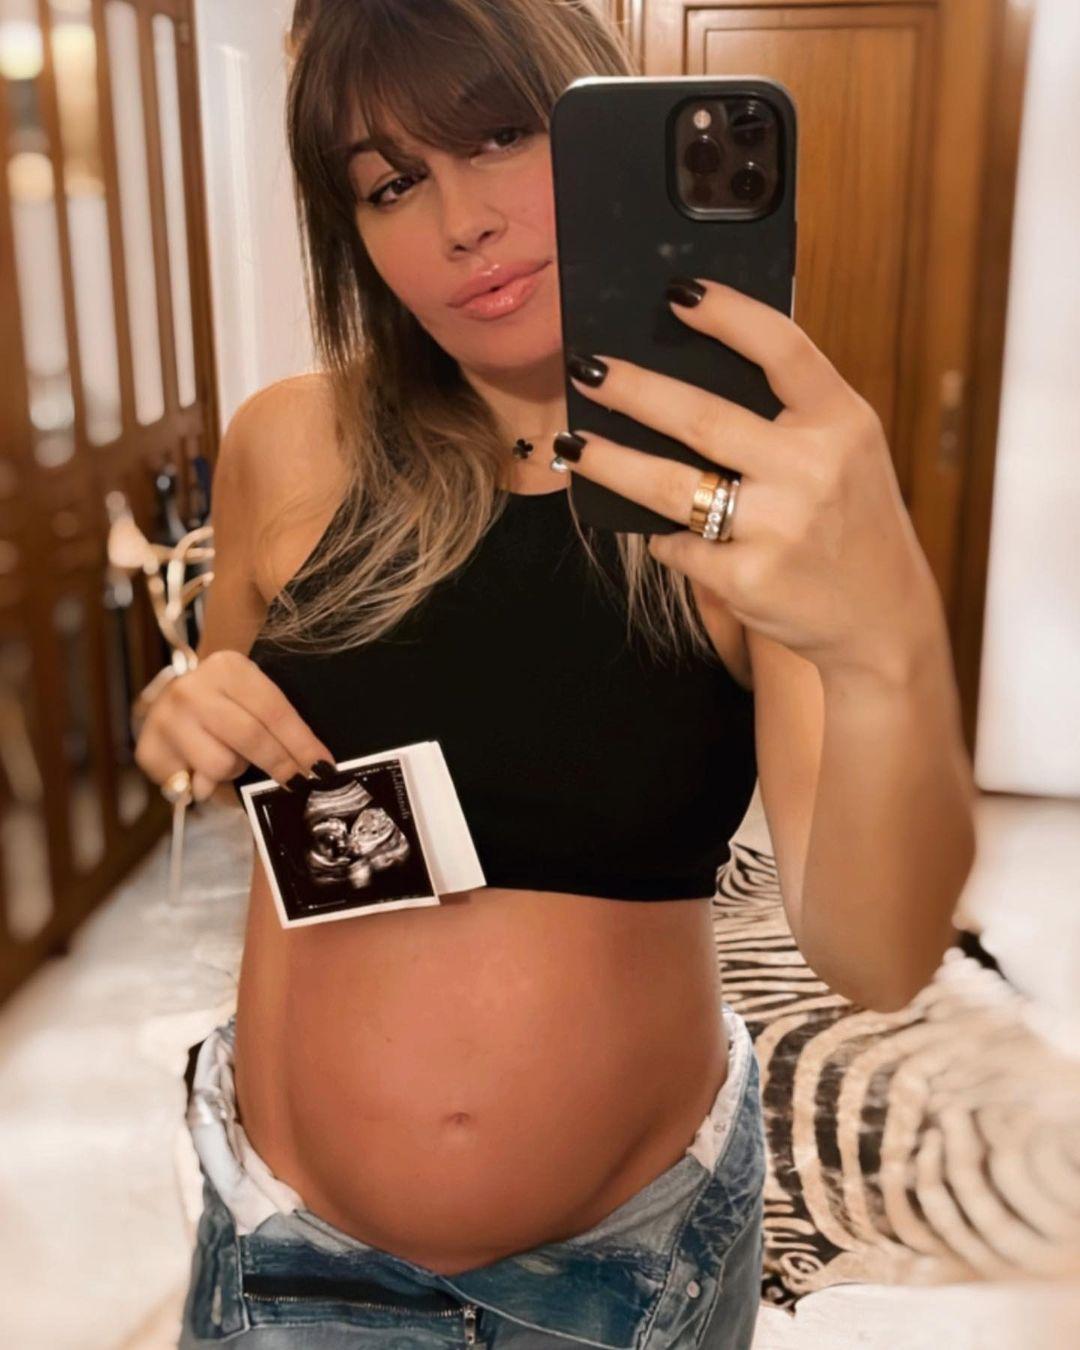 class="content__text"
 Secret is out, bump is out. 🤍🧸🤰
 #7monthspregnant 
 #etsiksafnika
 #oops 
 